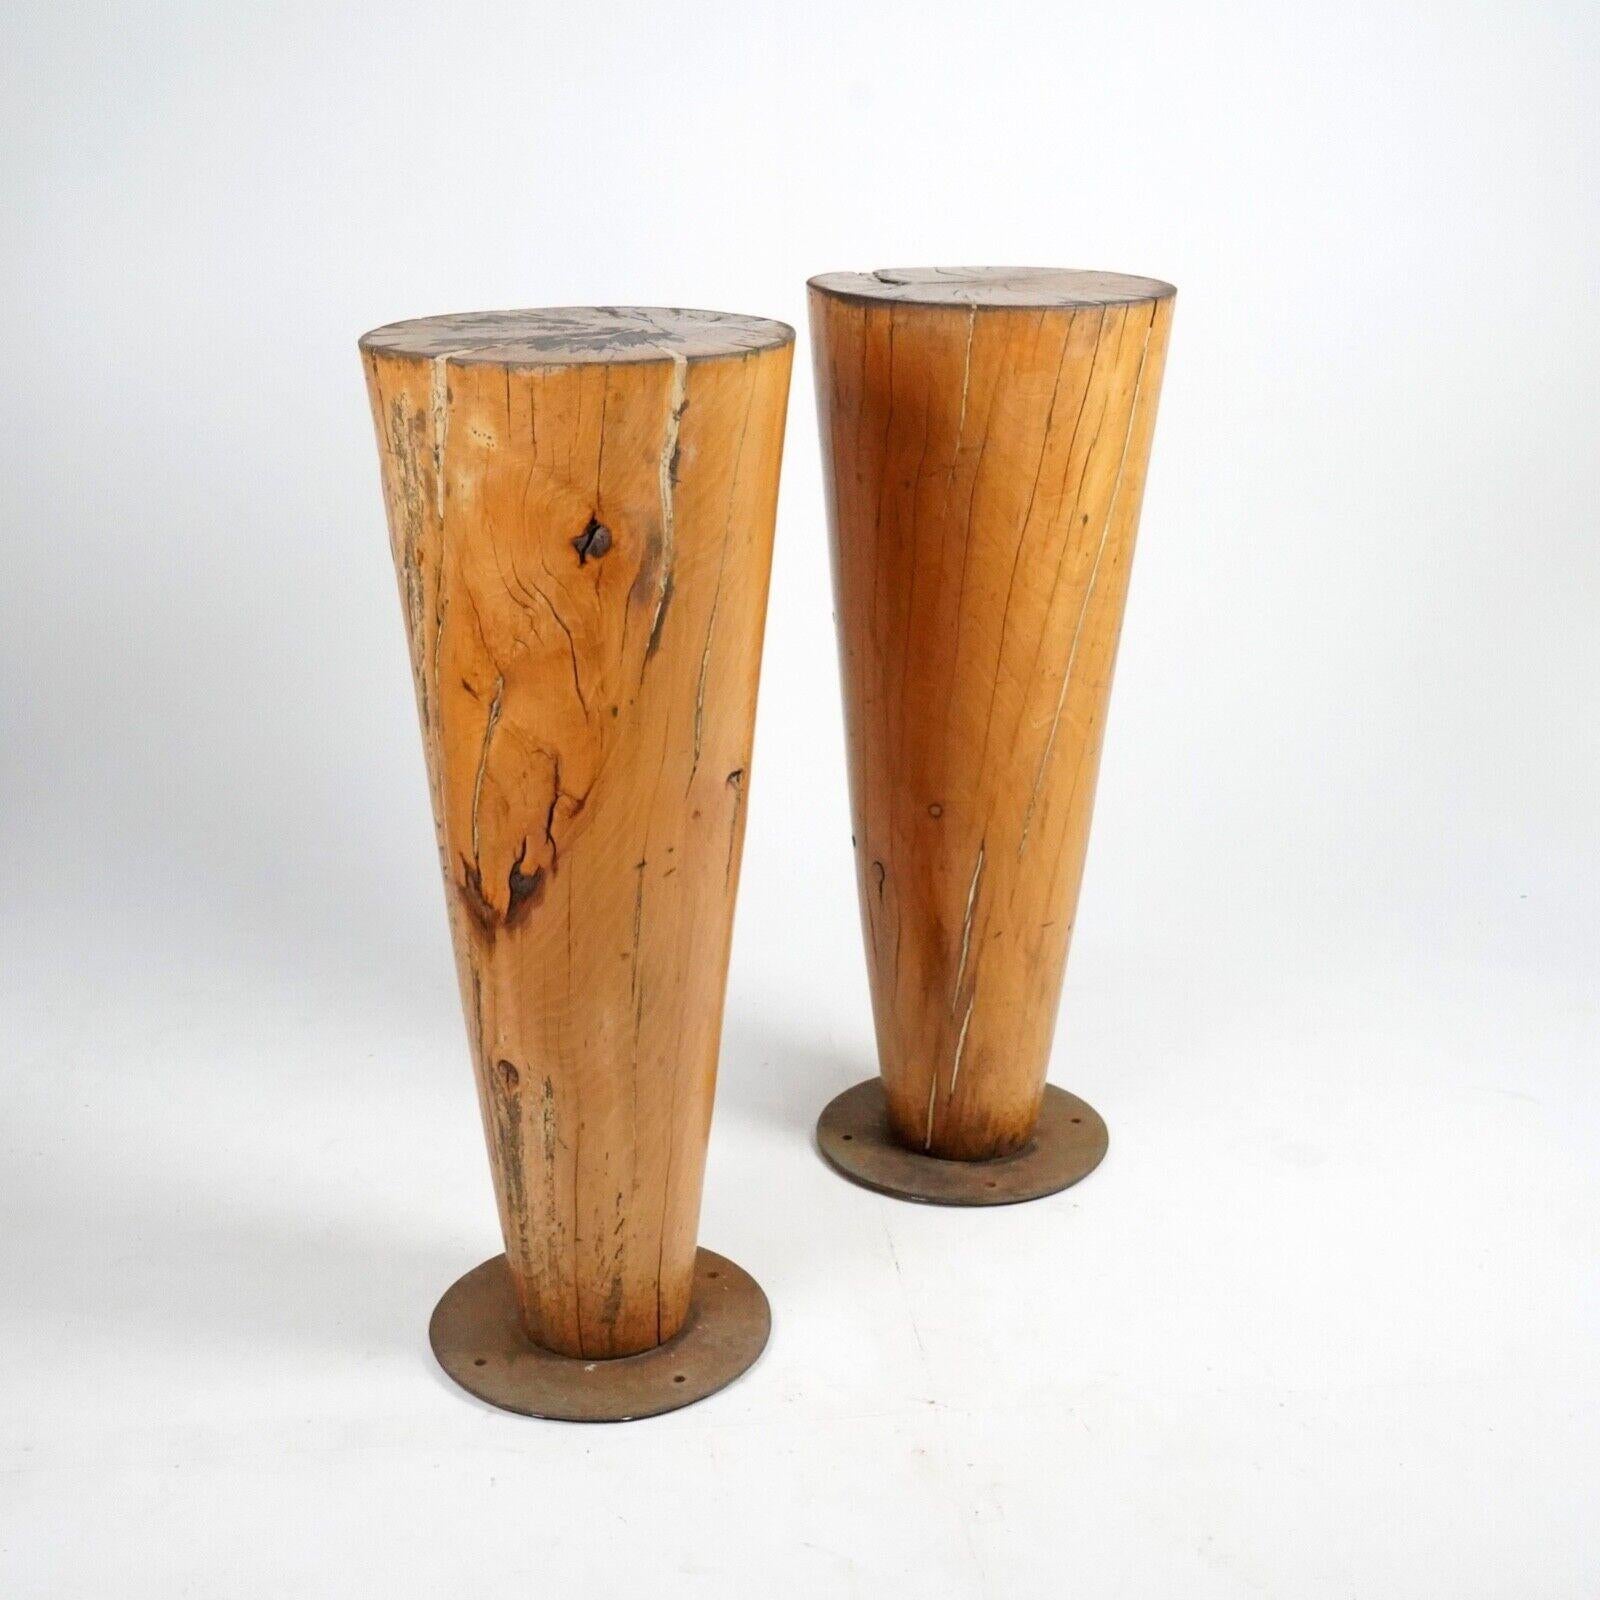 A pair of substantial cone shaped tall tables made from solid birch mounted on steel bases. 
Patinated and worn nicely from extensive use. 
They've been gently cleaned and given a wax to bring out the beautiful natural colour of the wood.
Reputed to